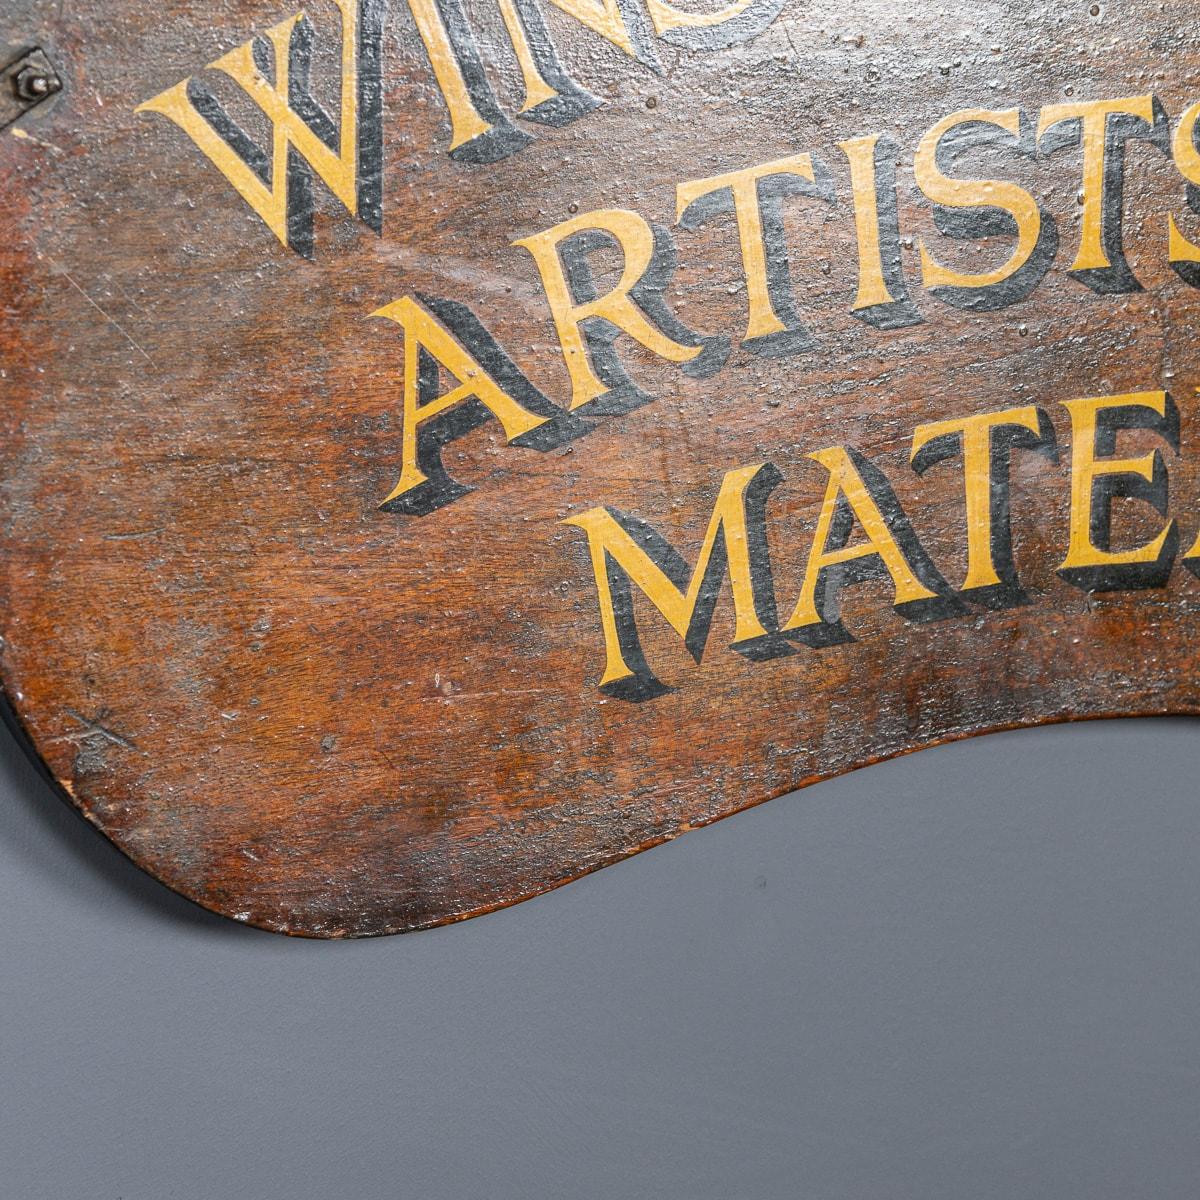 Antique 20th Century Winsor & Newton Paint Palette Advertising Sign c.1920 In Good Condition For Sale In Royal Tunbridge Wells, Kent